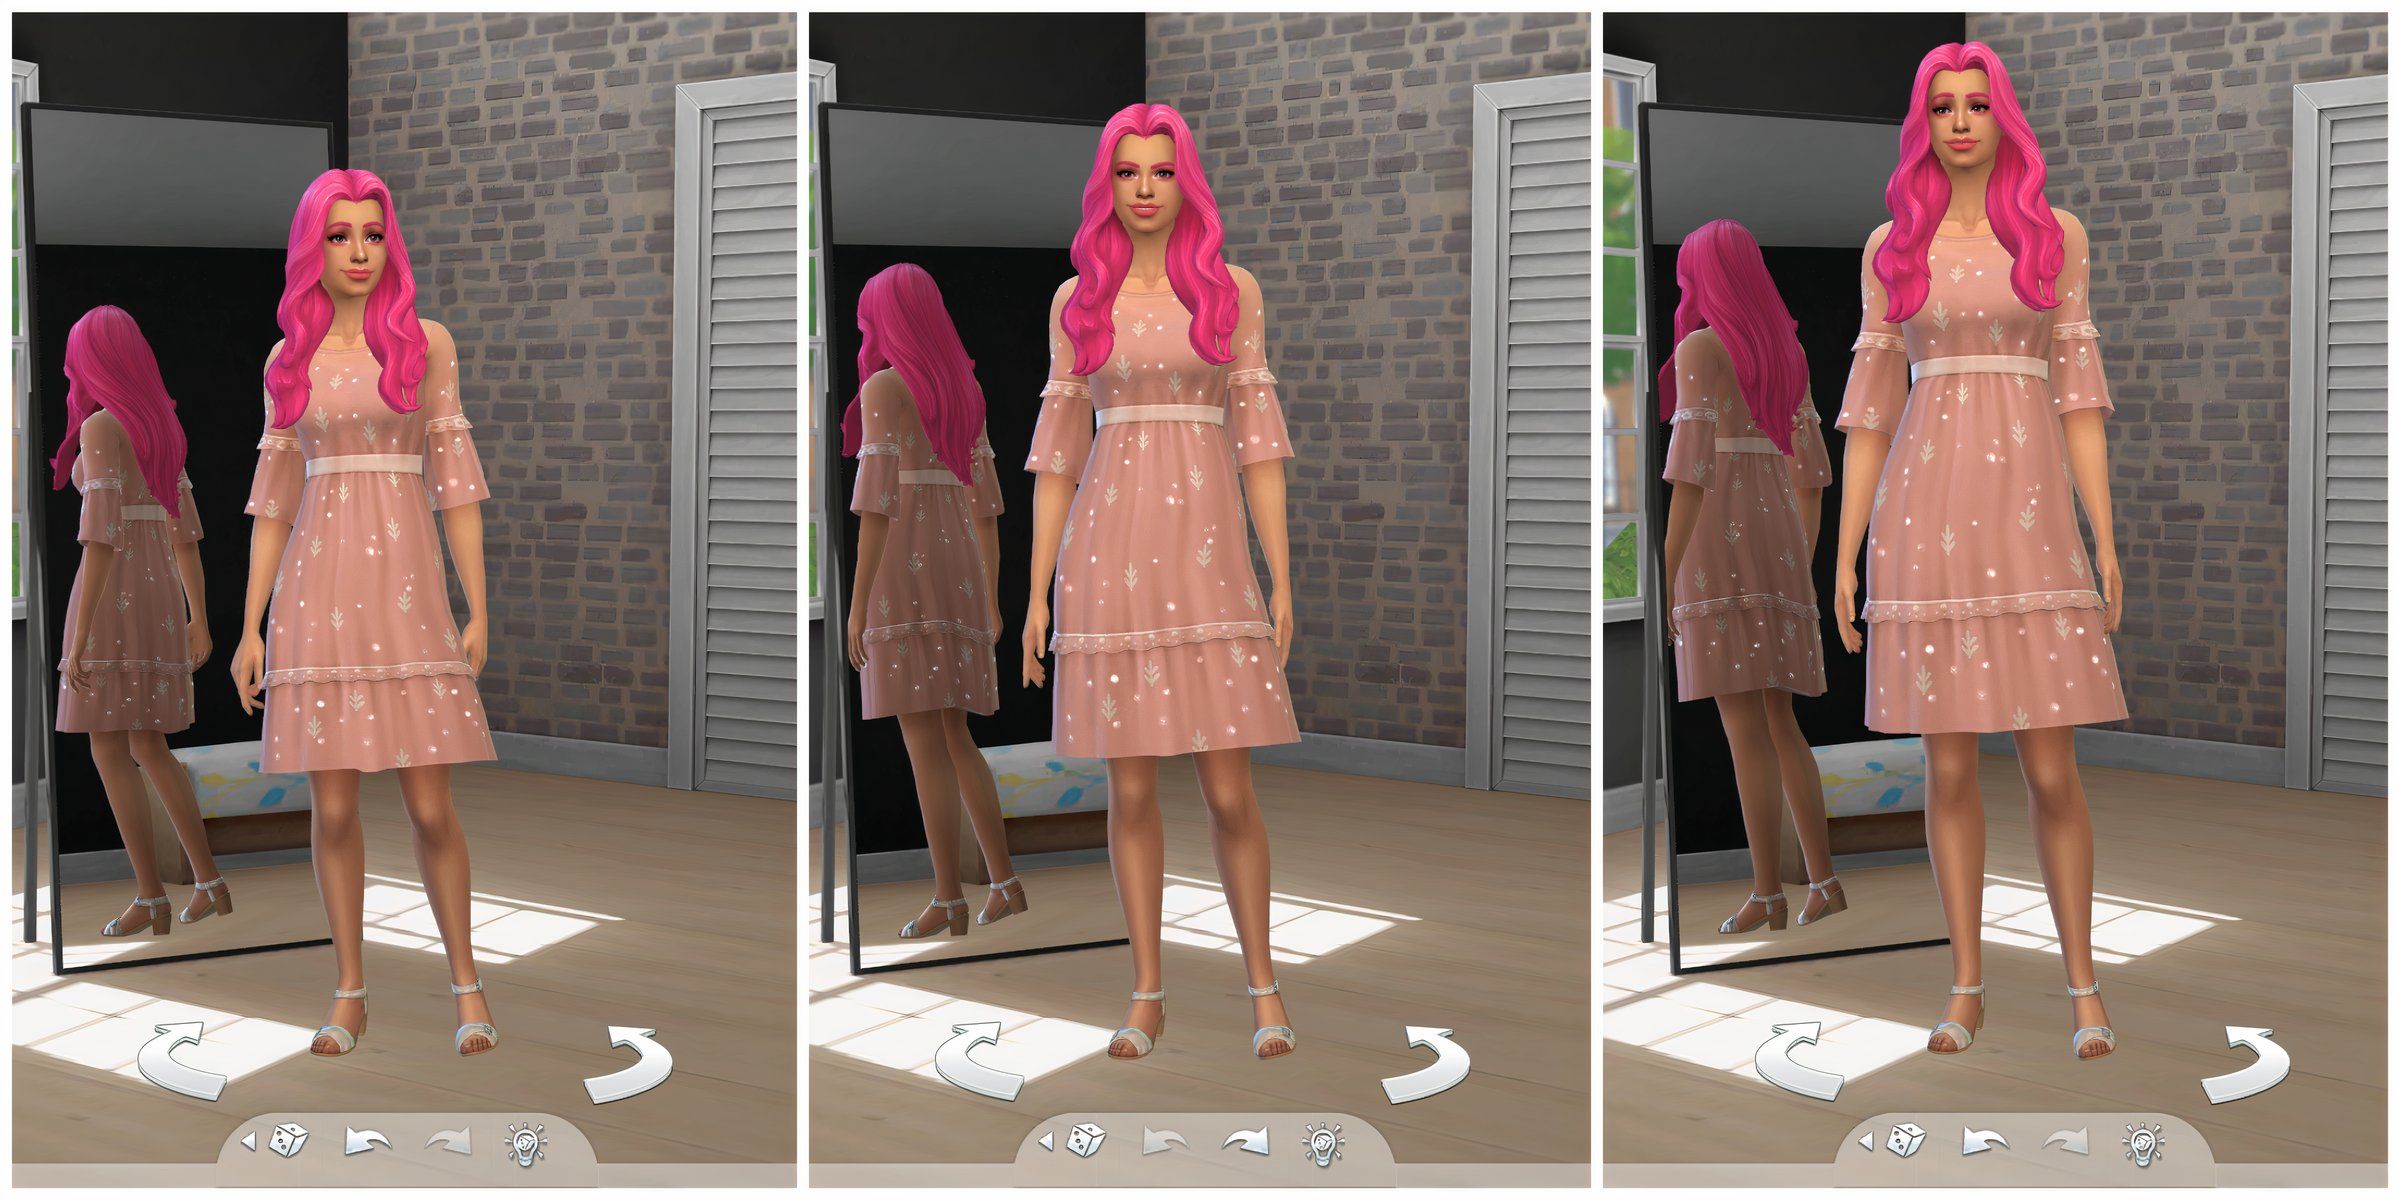 Examples of short, medium, and tall Sims that can be made with the Height Slider mod